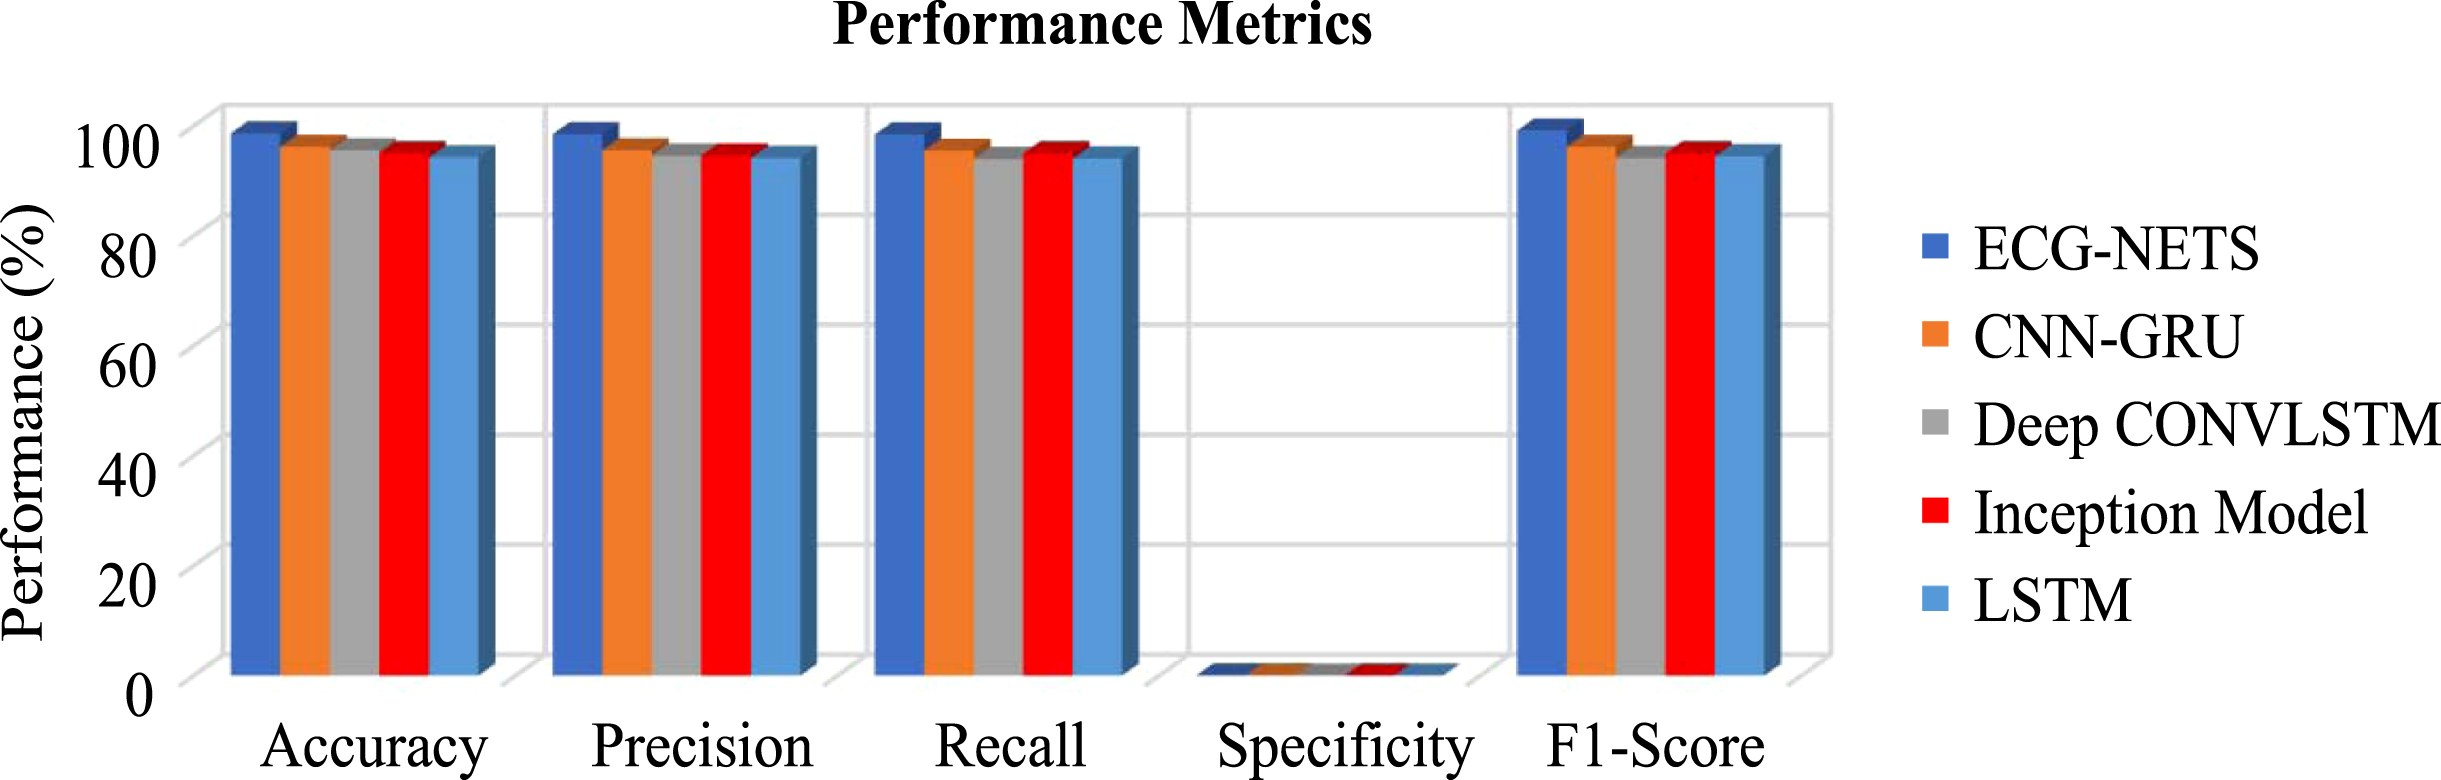 Performance metrics comparison for exiting methods in detecting hand related eating activities (real time datasets).